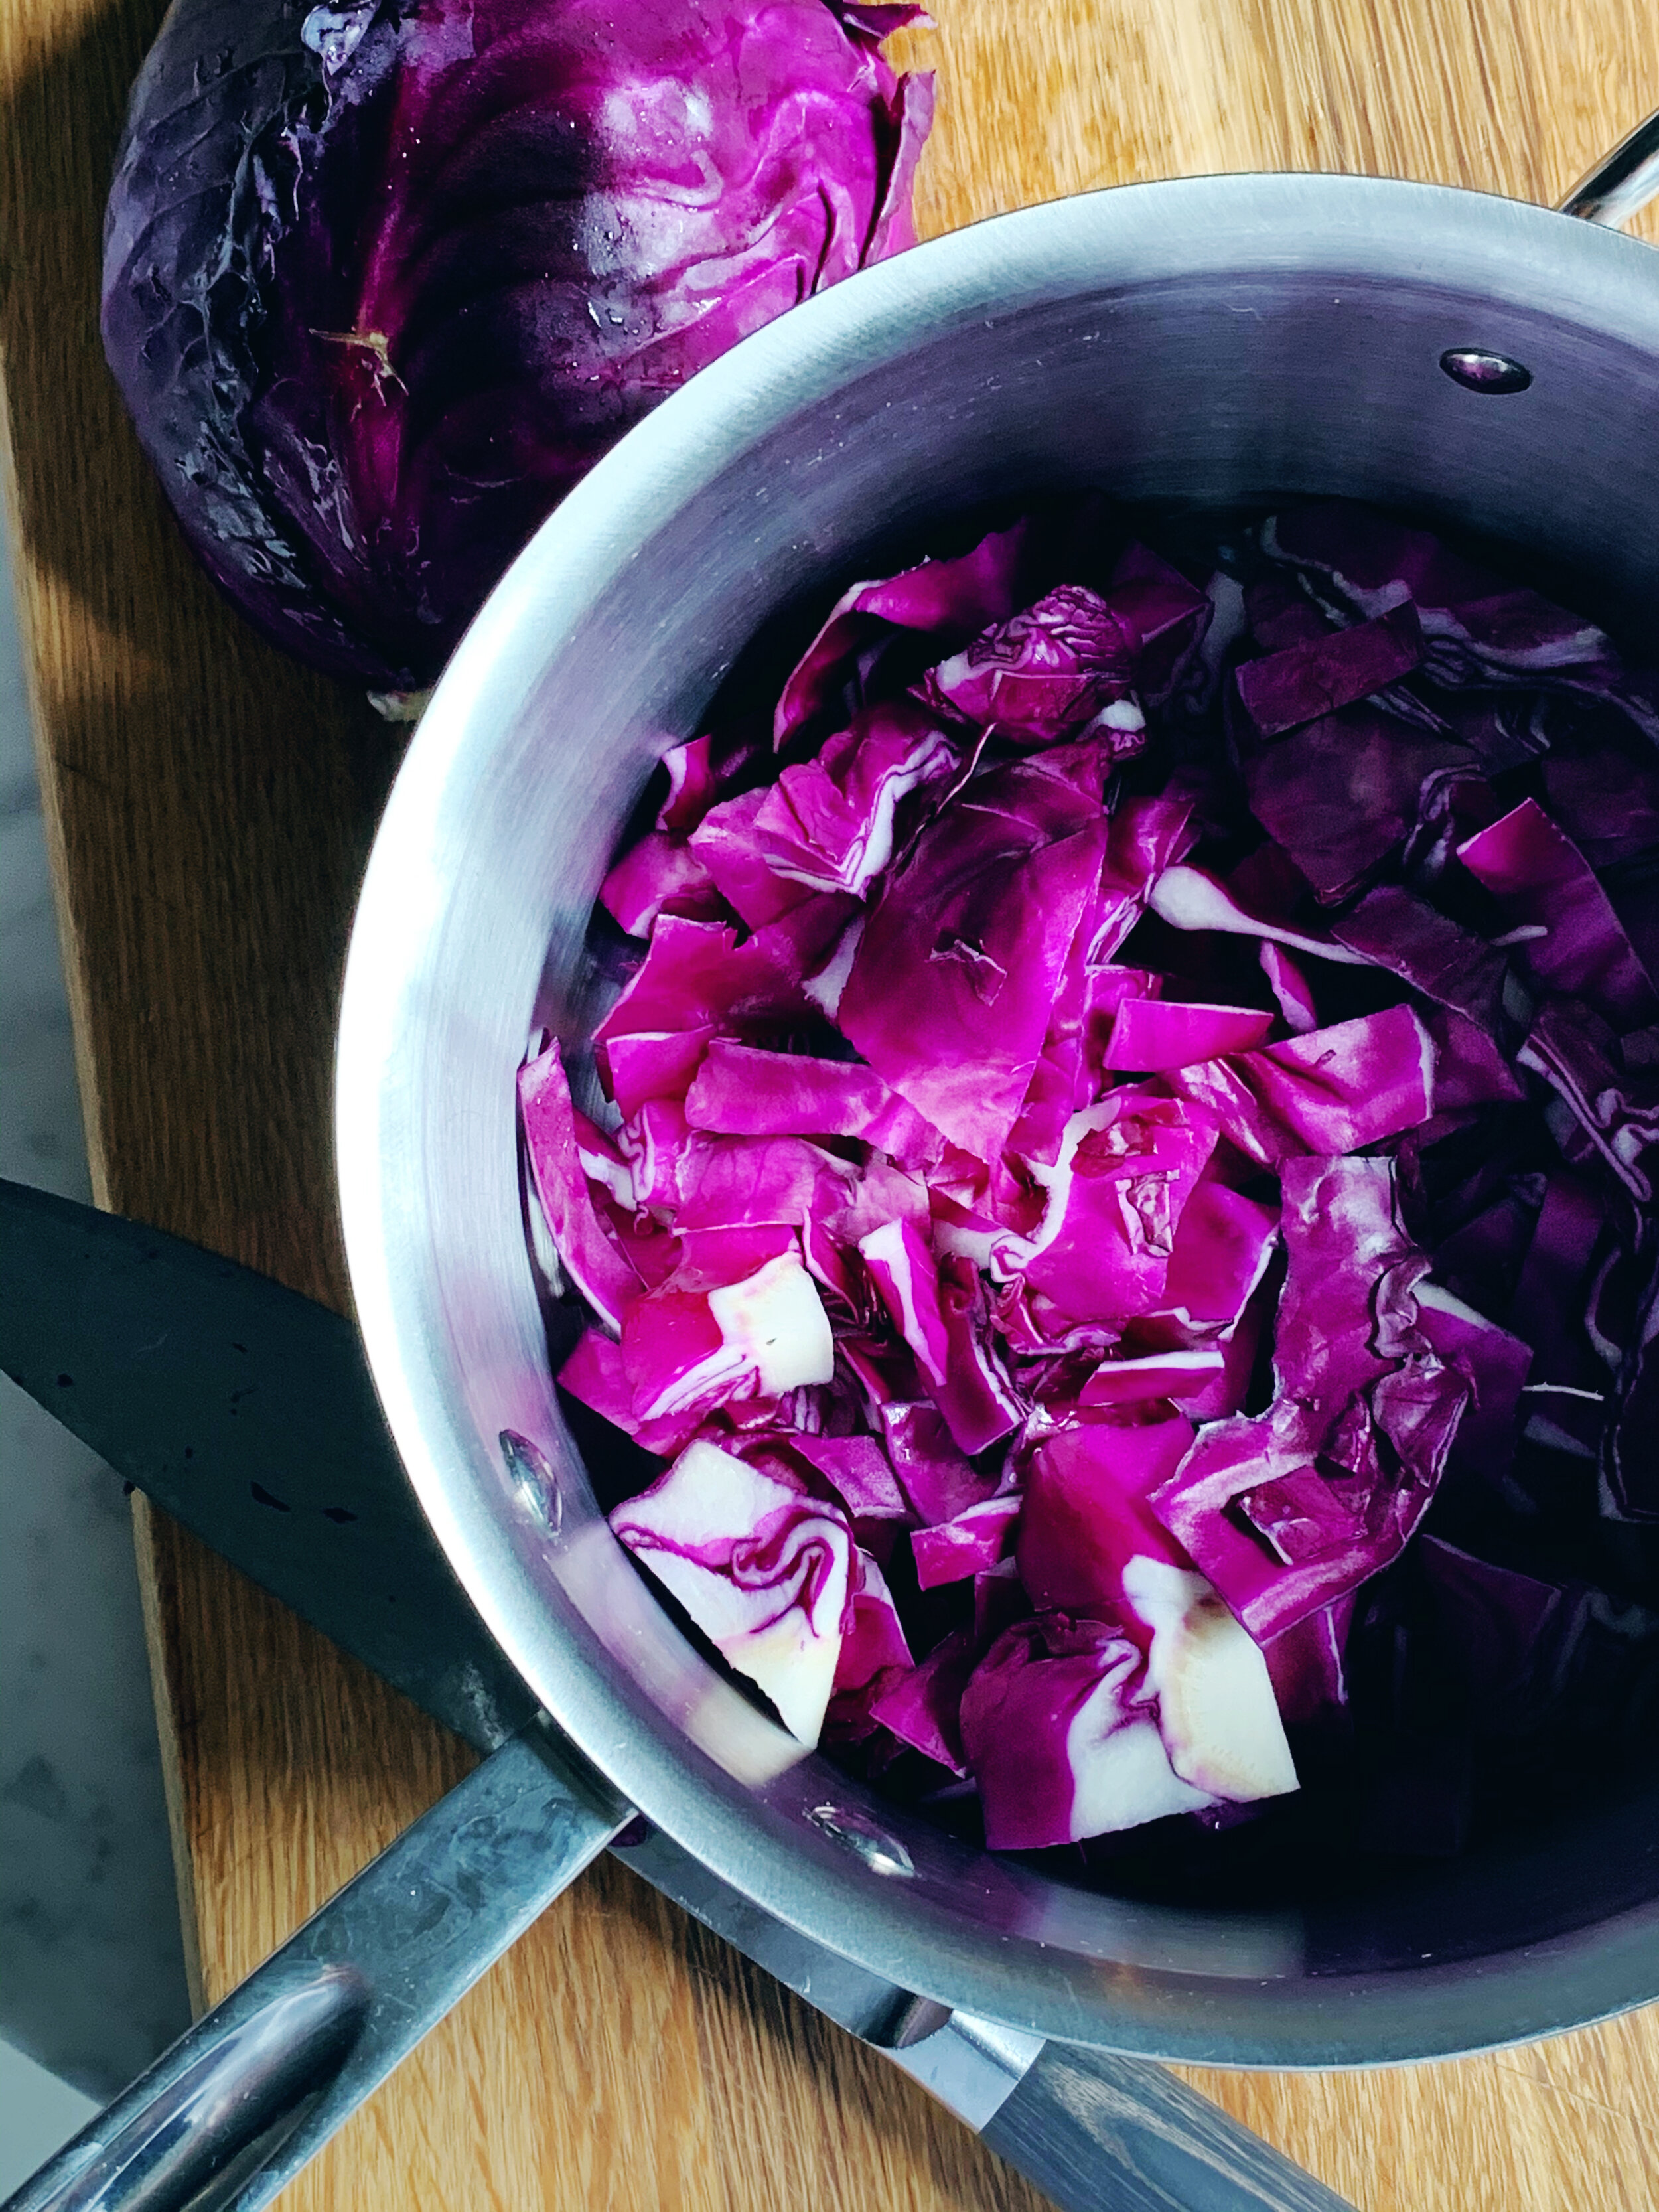 chop whole cabbage and add to pot